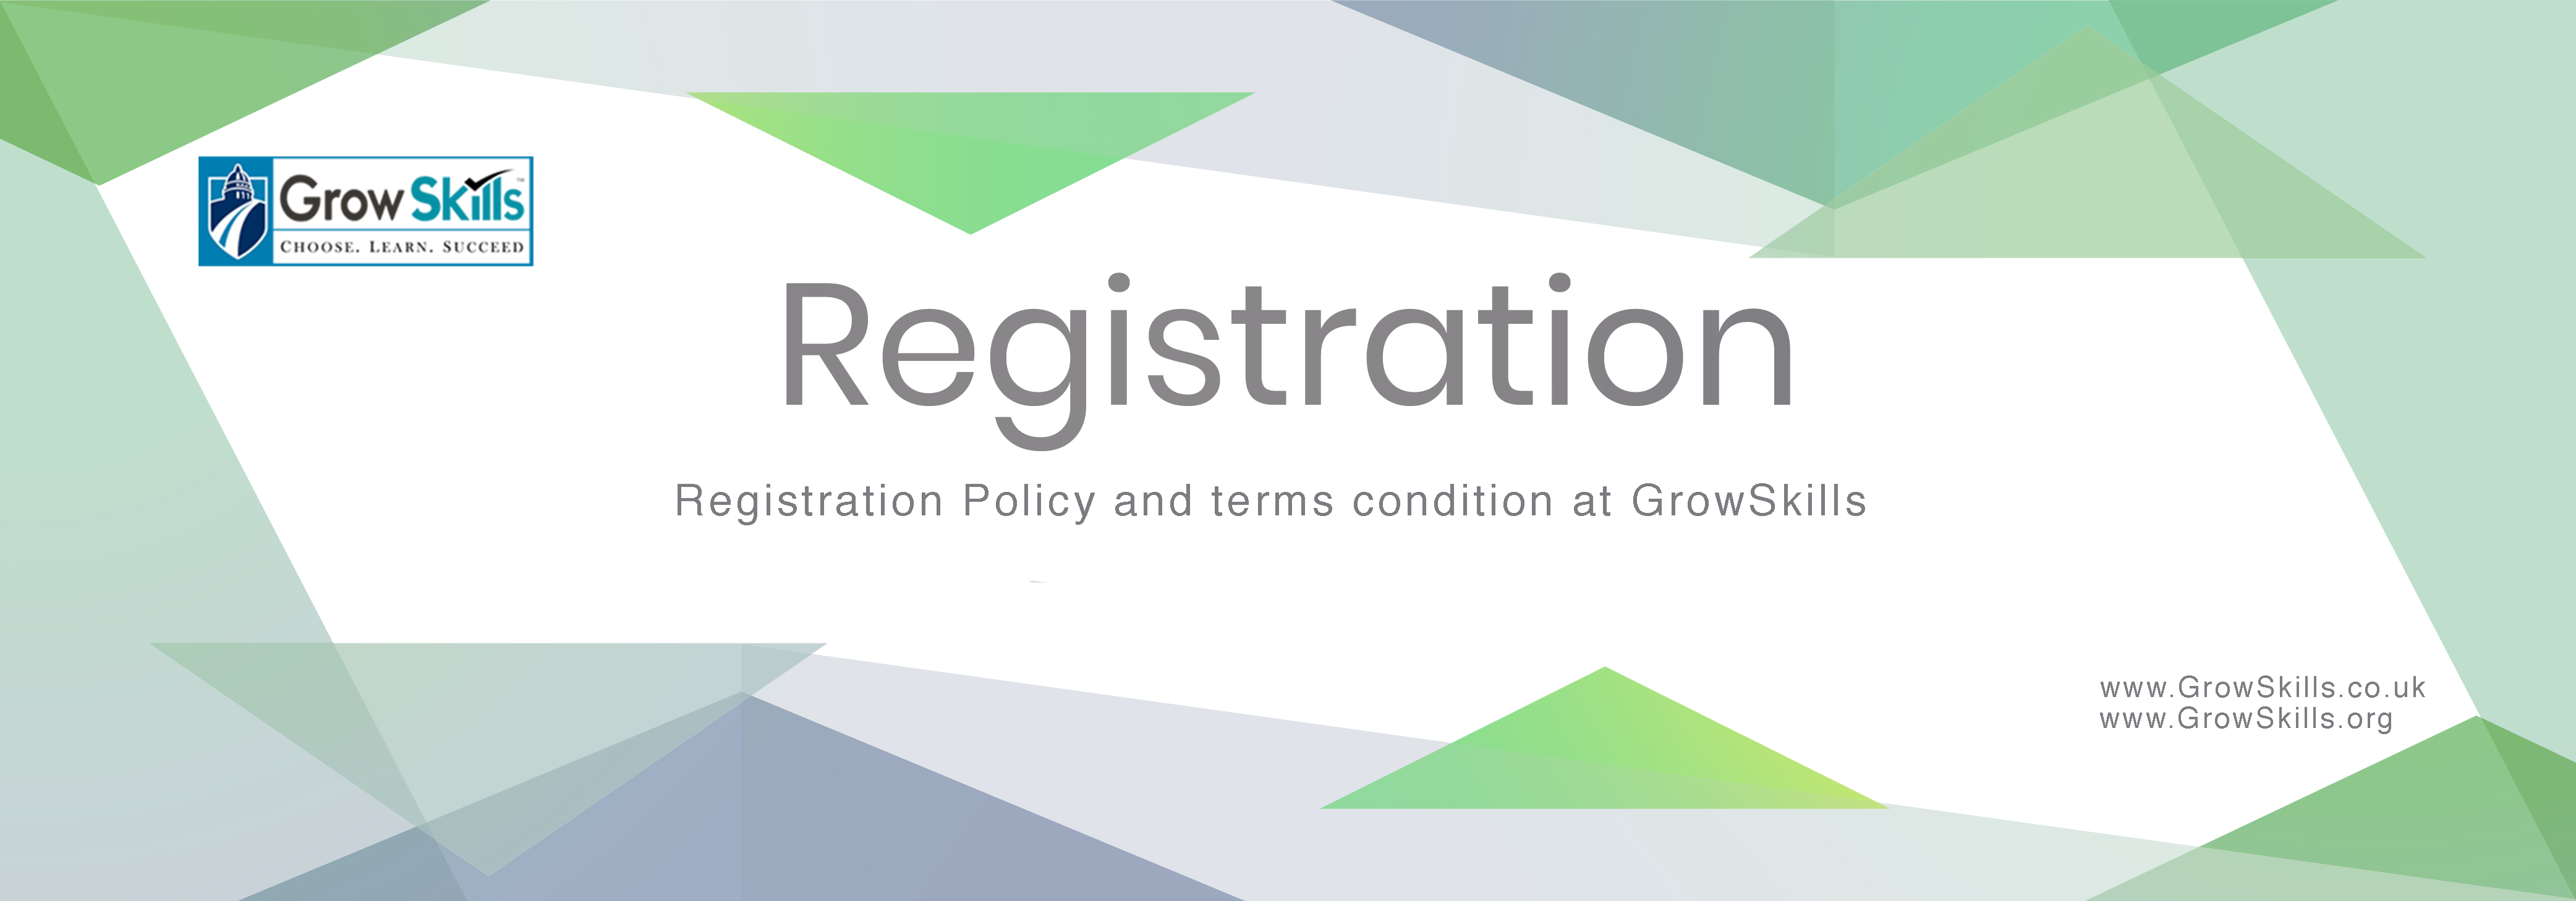 Registration Policy at GrowSkills 